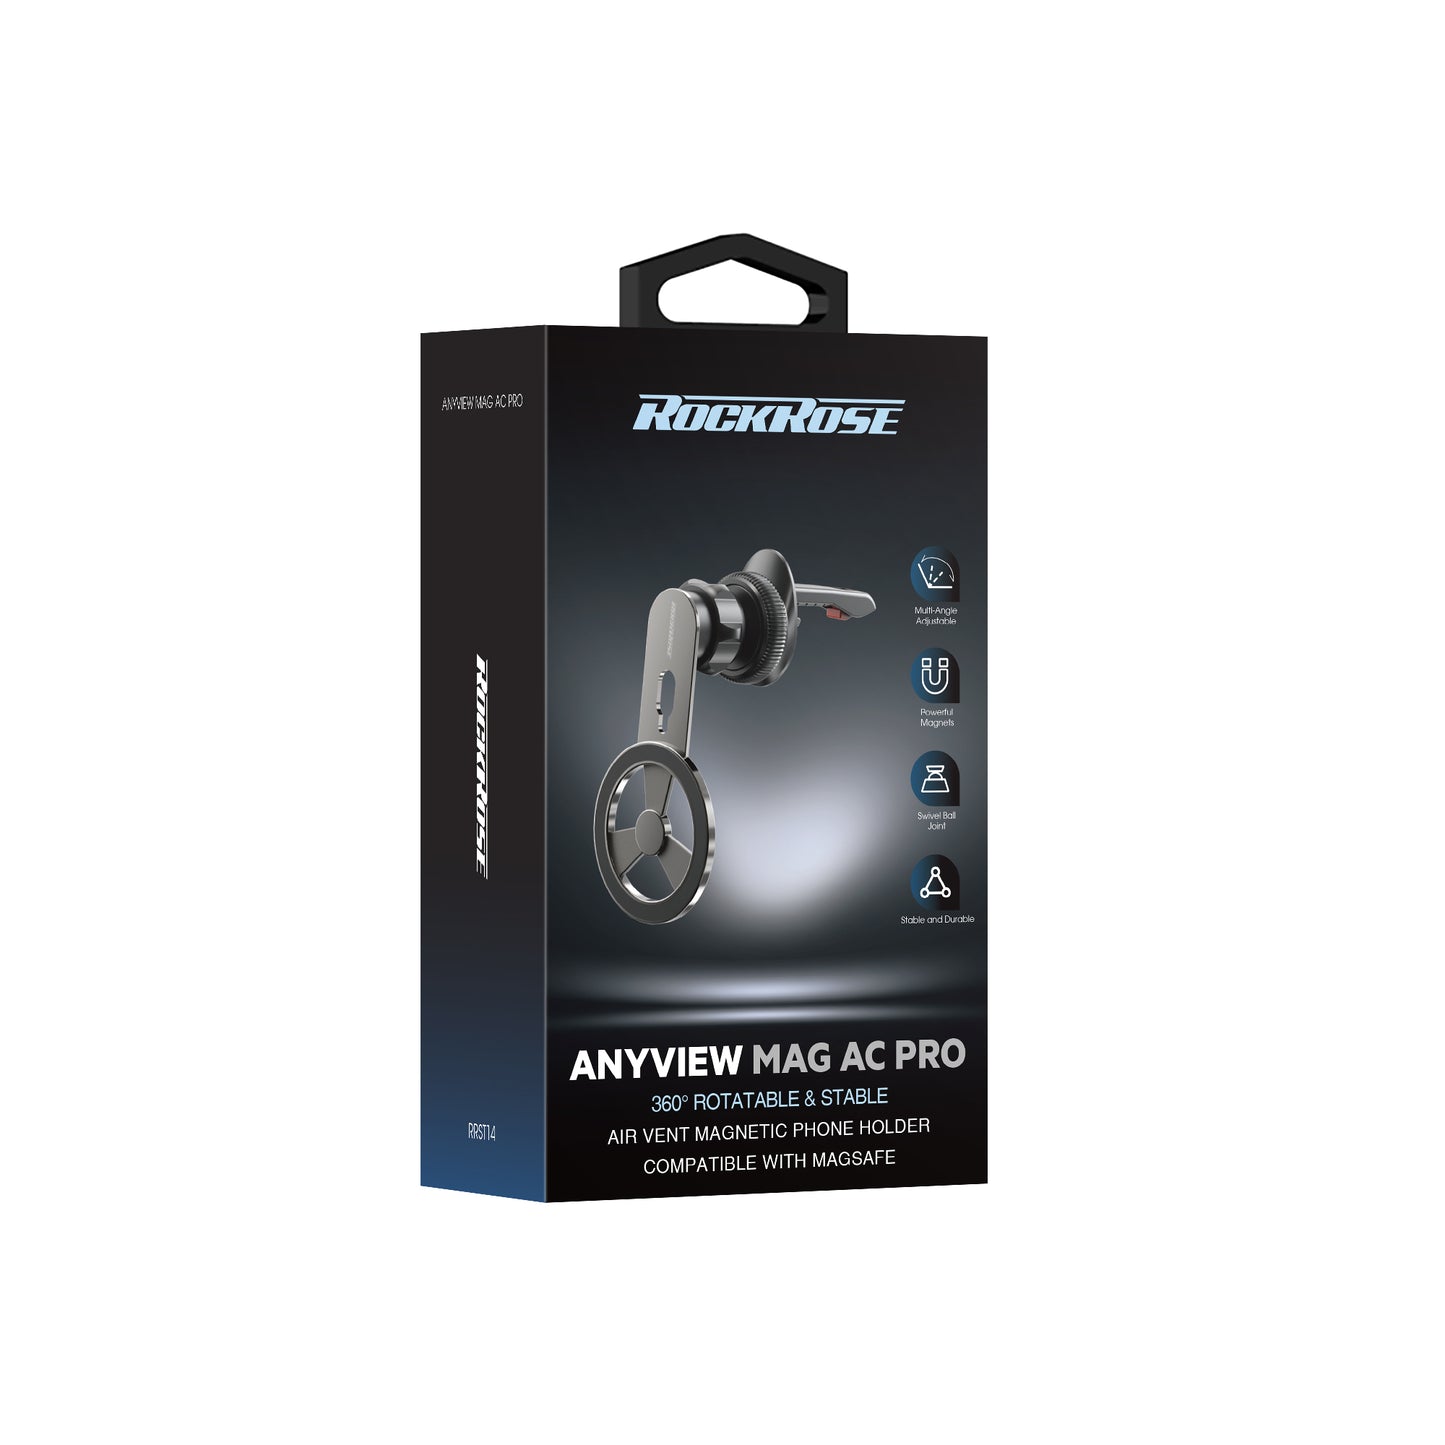 Rockrose 360° Rotatable & Foldable Anyview Mag AC Pro Air Vent Magnetic Phone Holder - Black